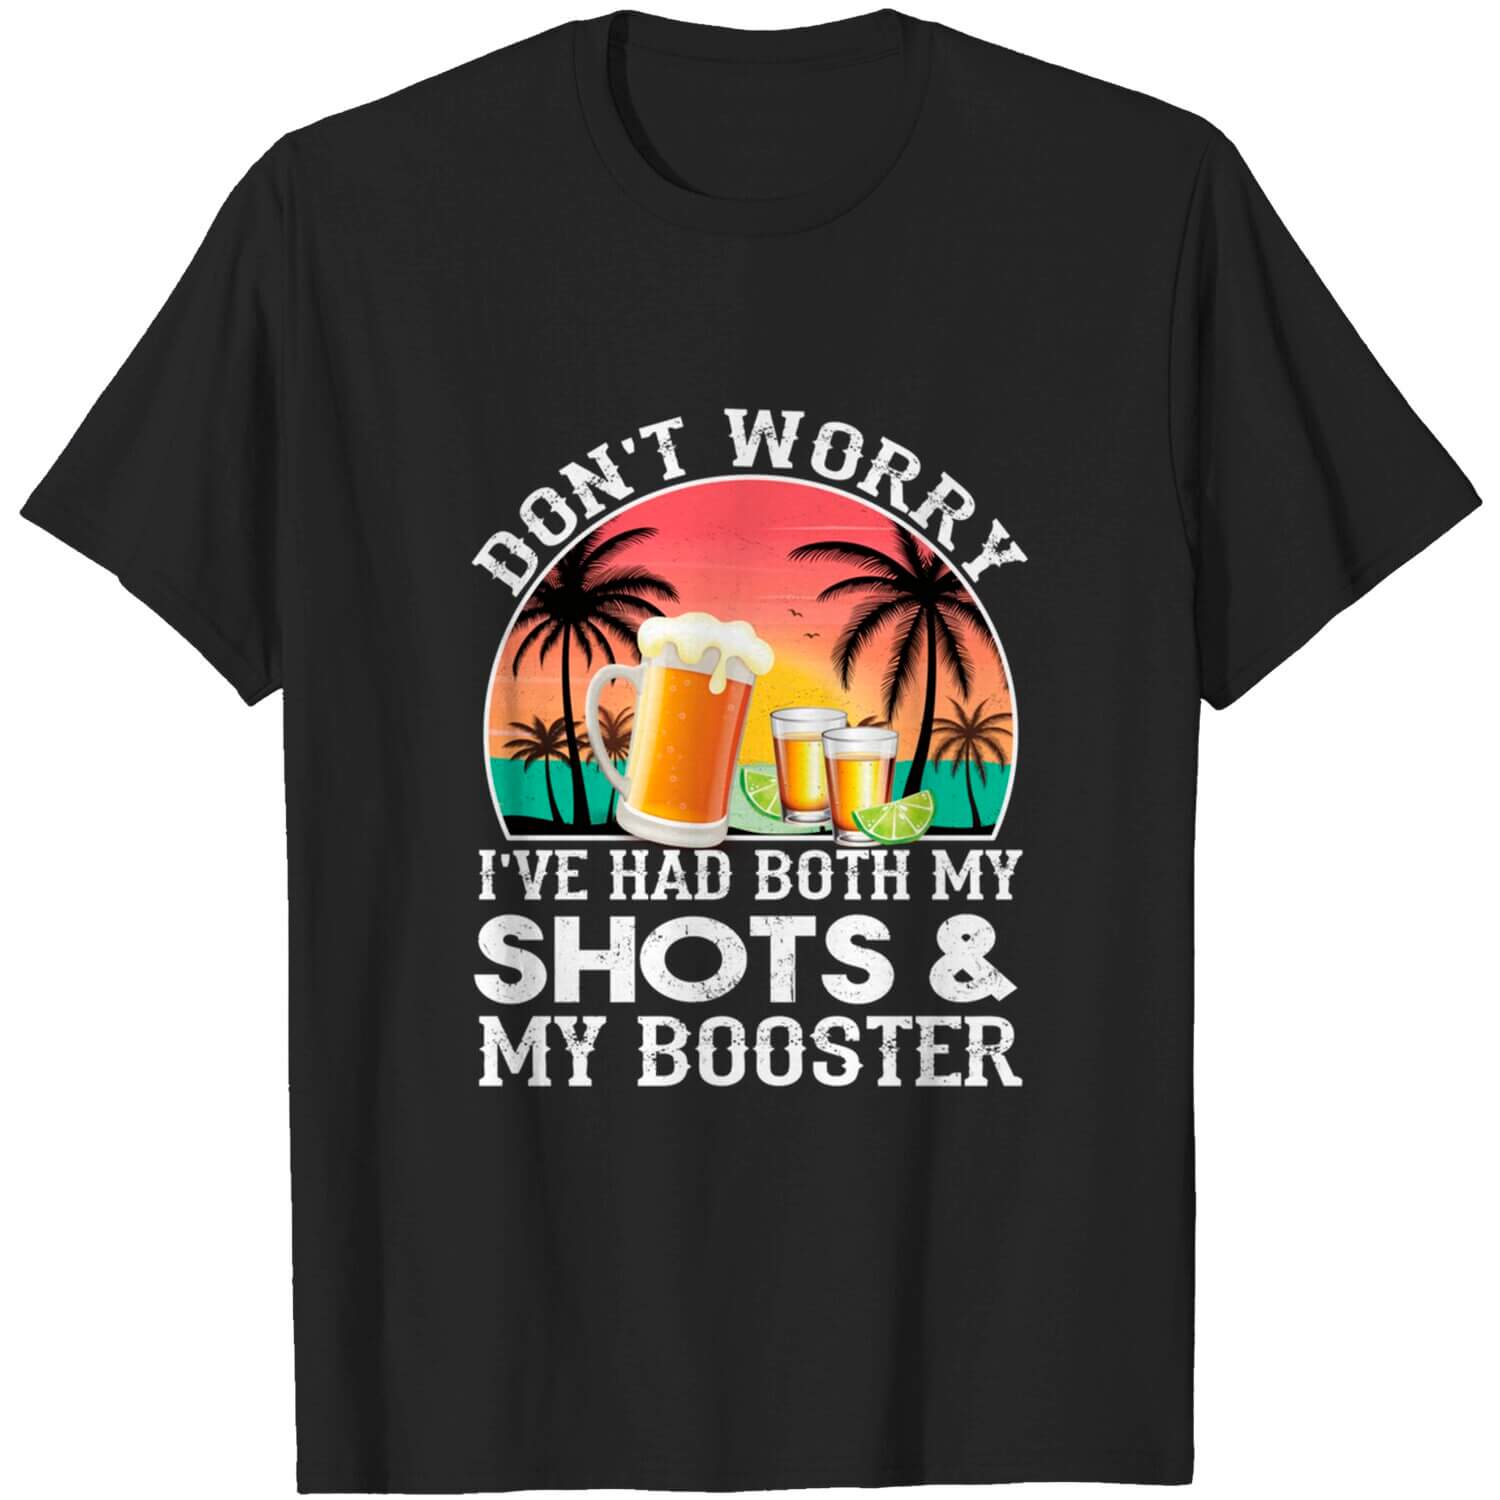 ItsYourTshirt - Unique Custom Apparel for Beer and Sports Fans